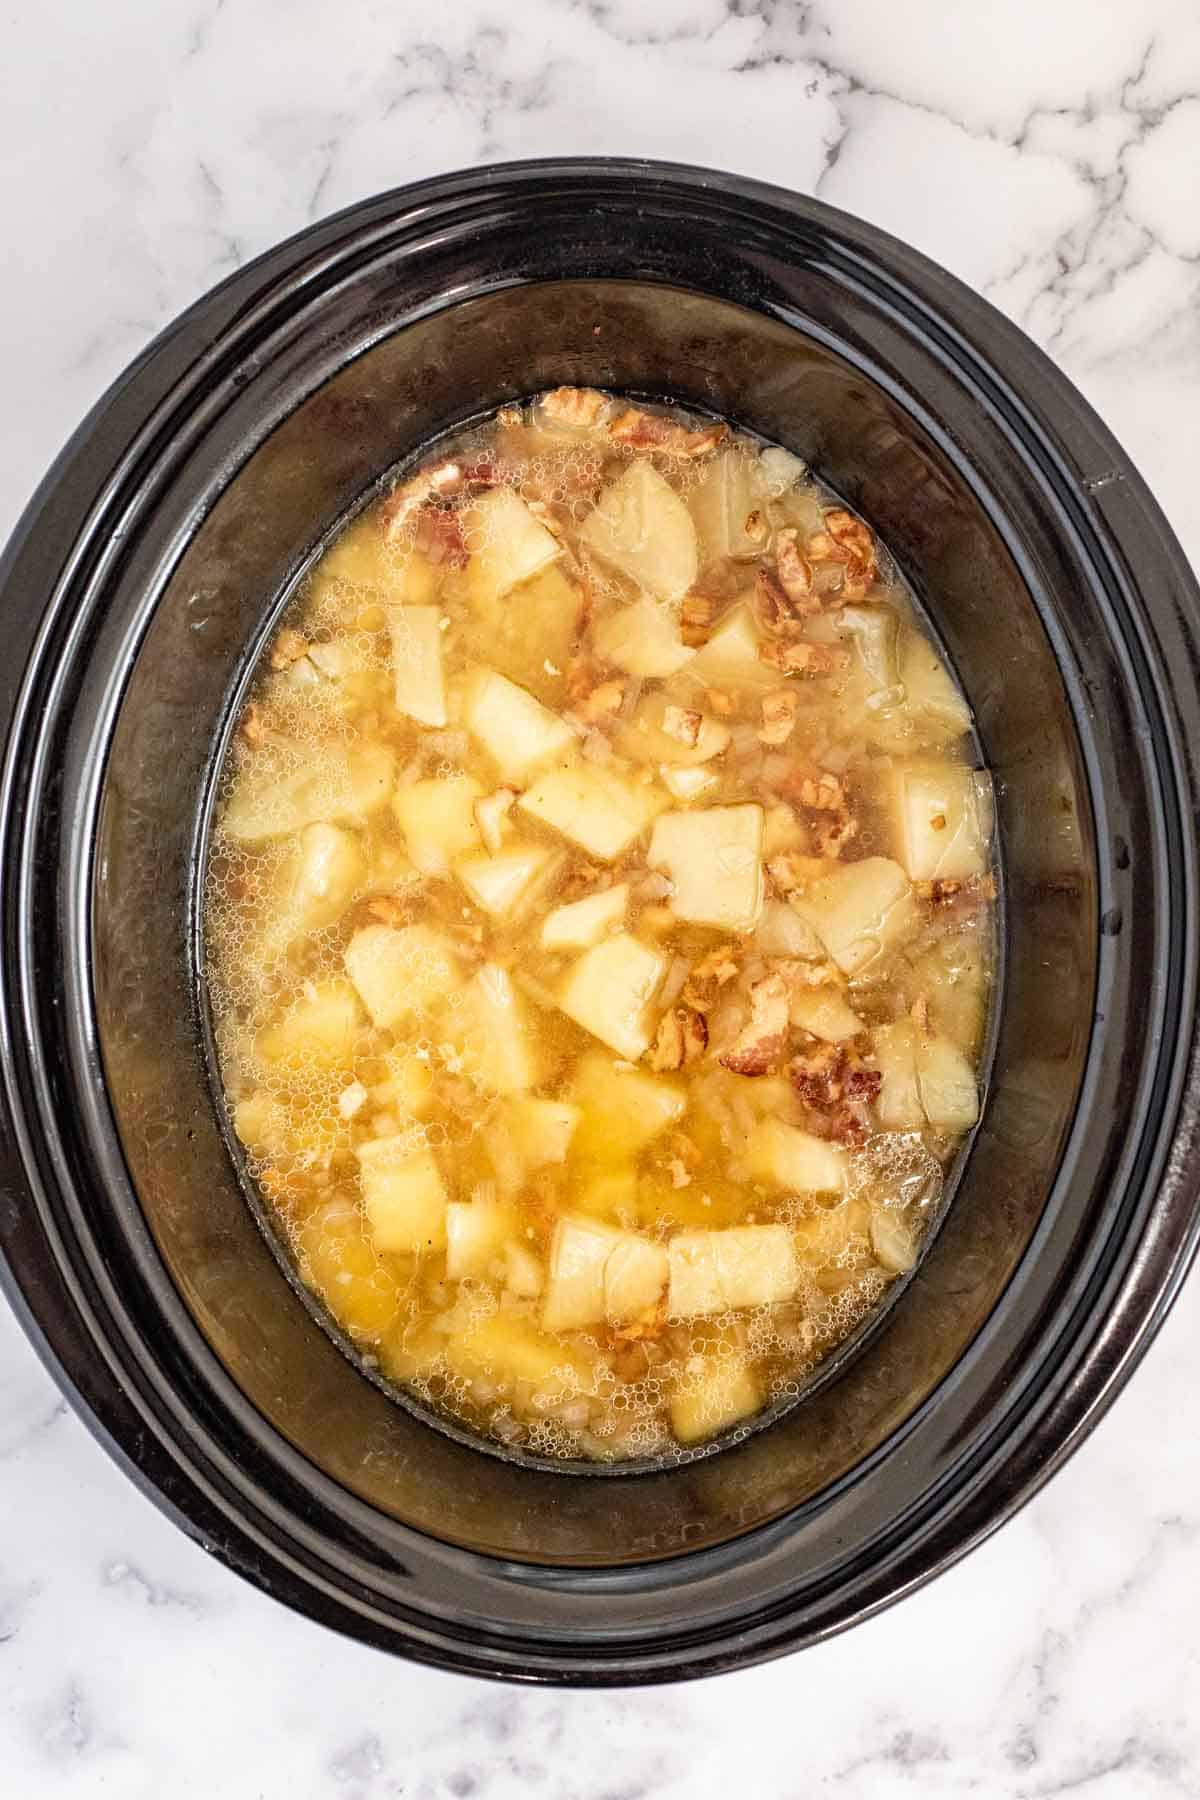 A crockpot with the cooking soup after the potatoes are fork tender.